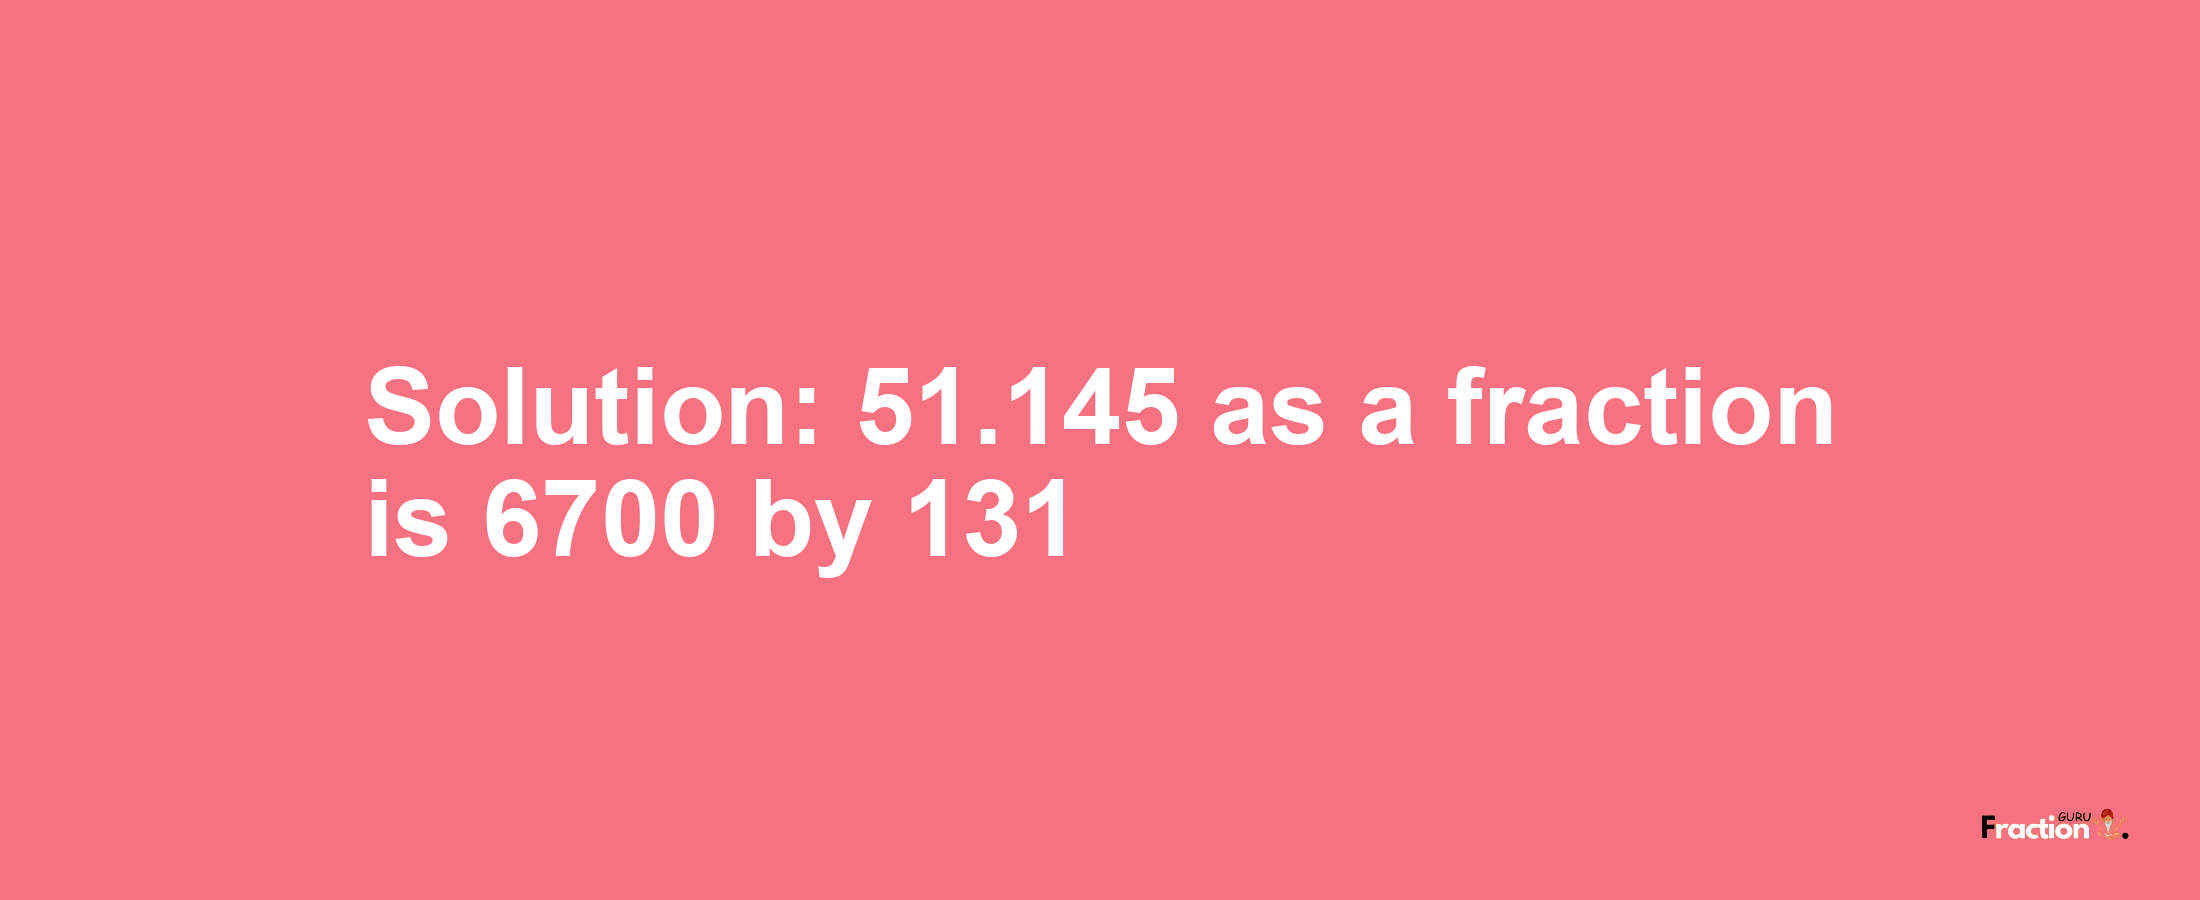 Solution:51.145 as a fraction is 6700/131